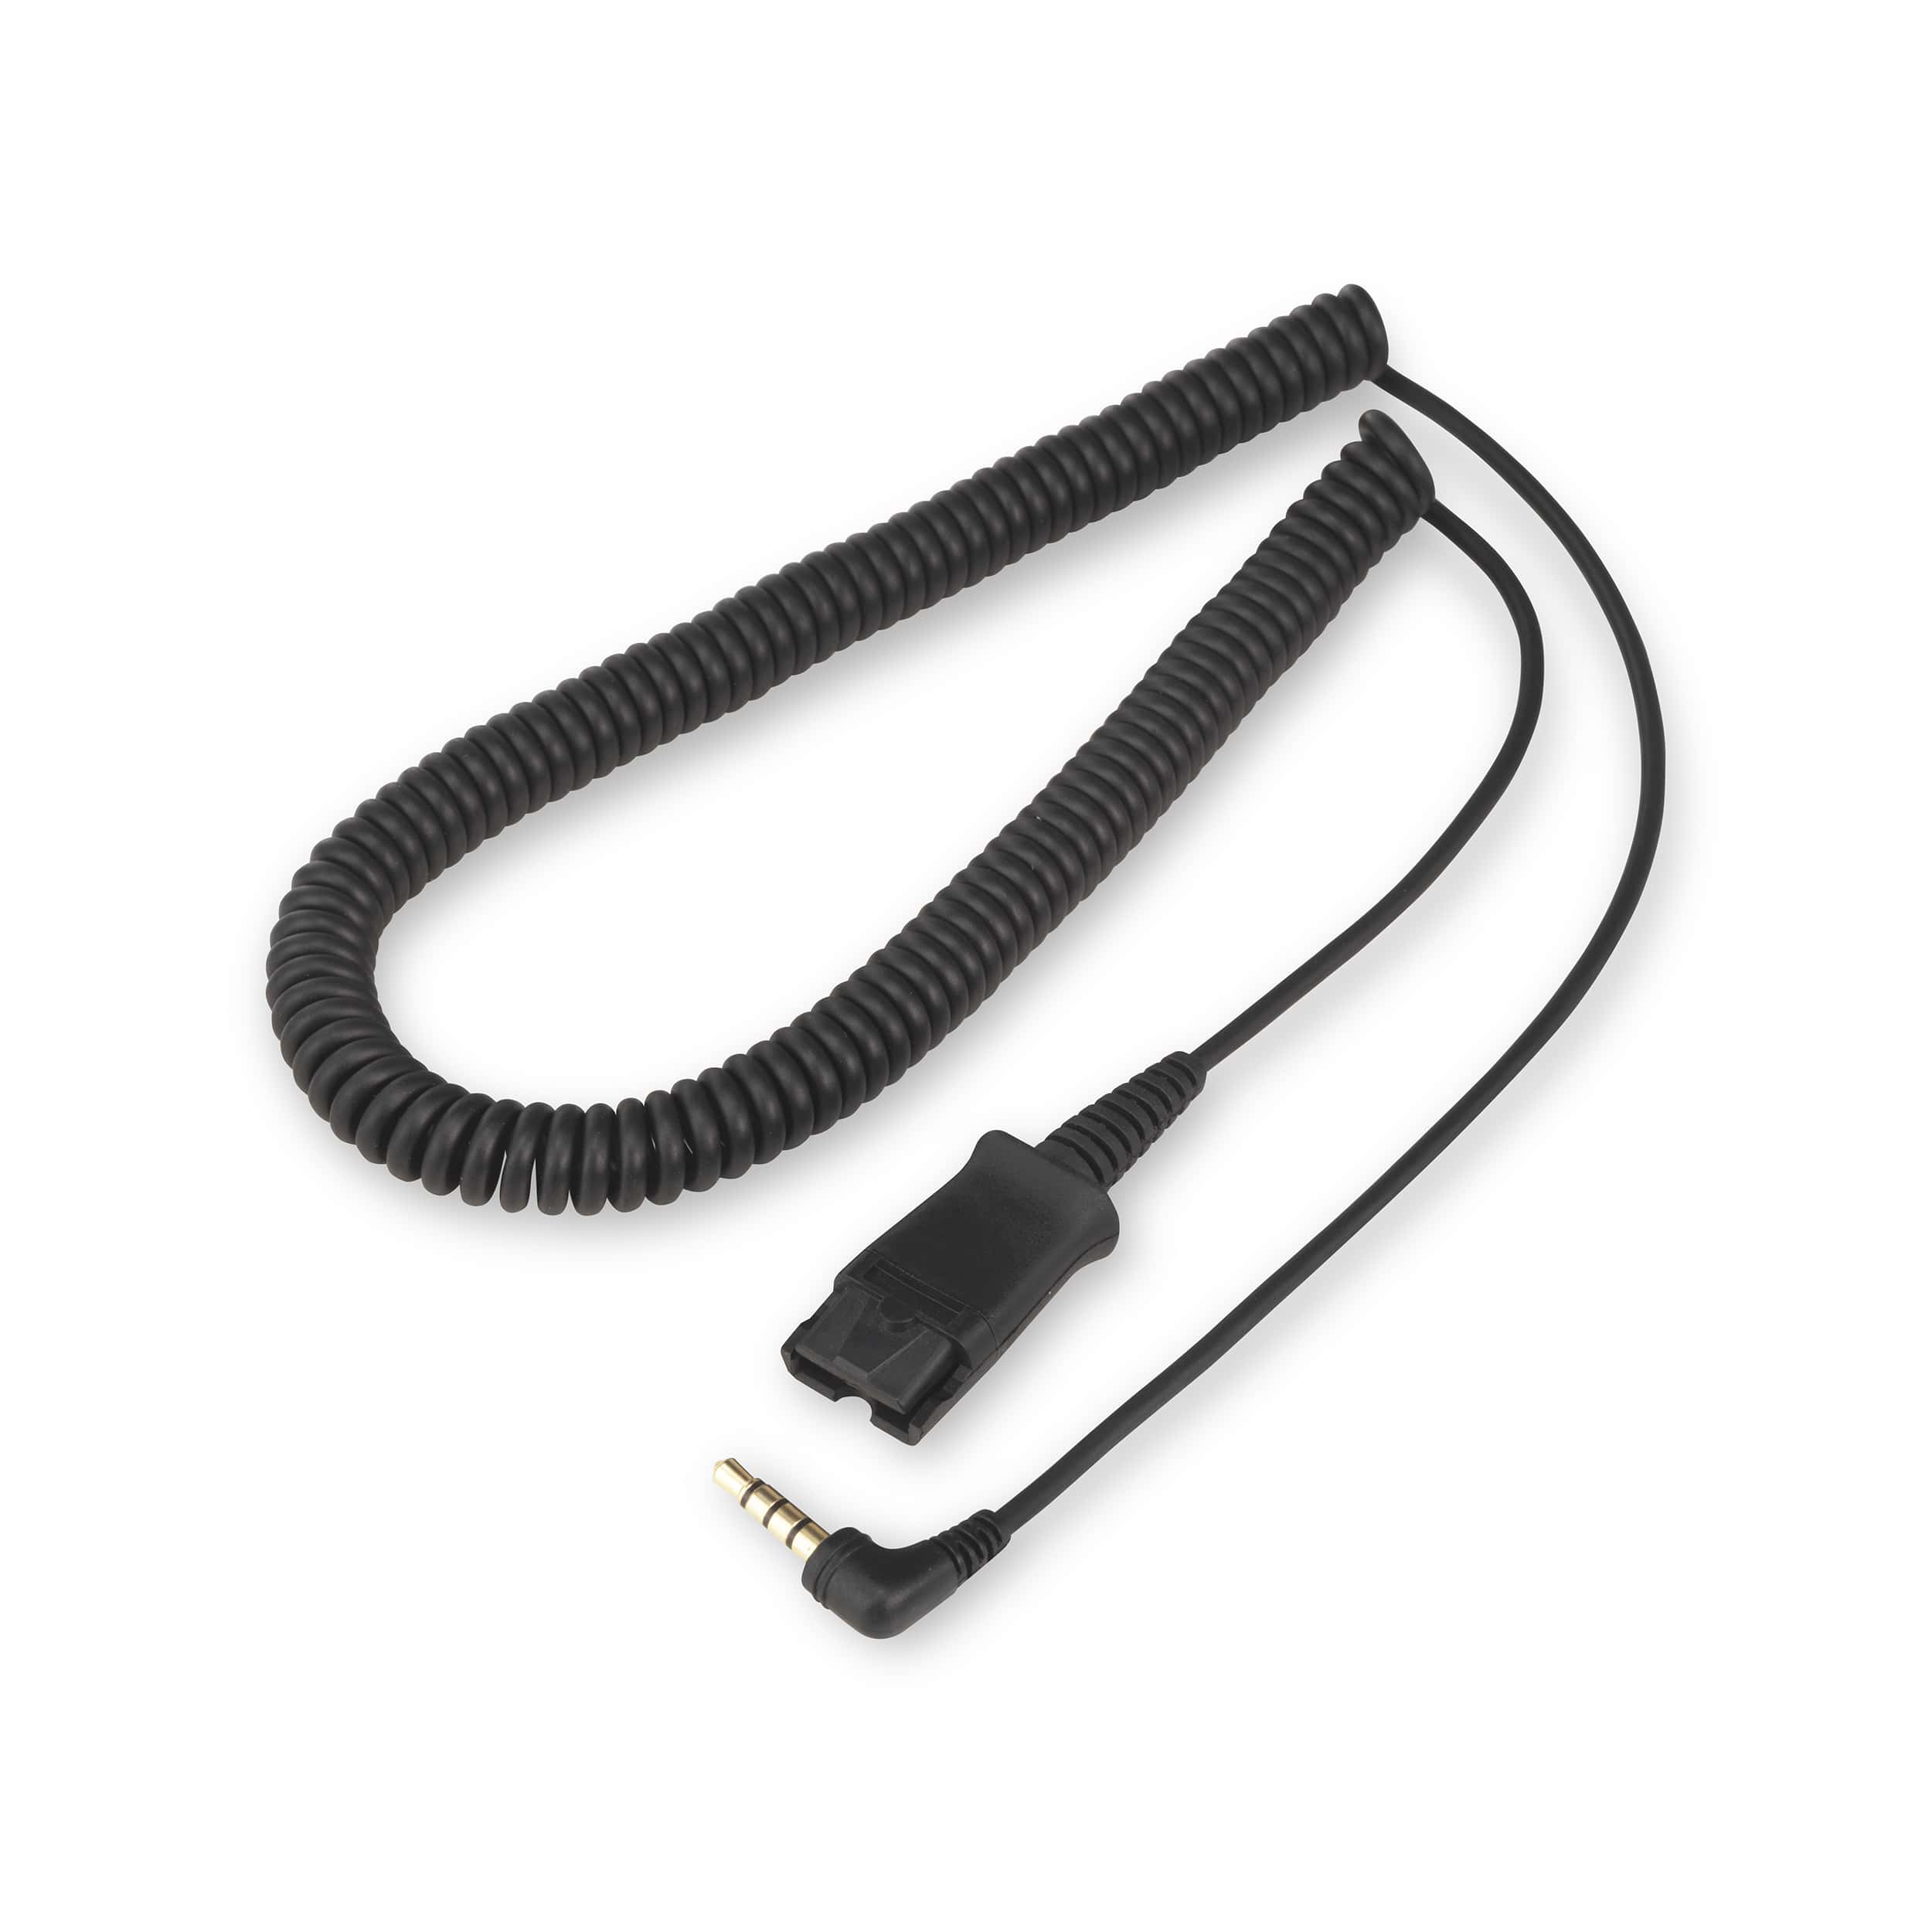 3.5mm Jack Adapter Cable for A100 Headsets - view 1